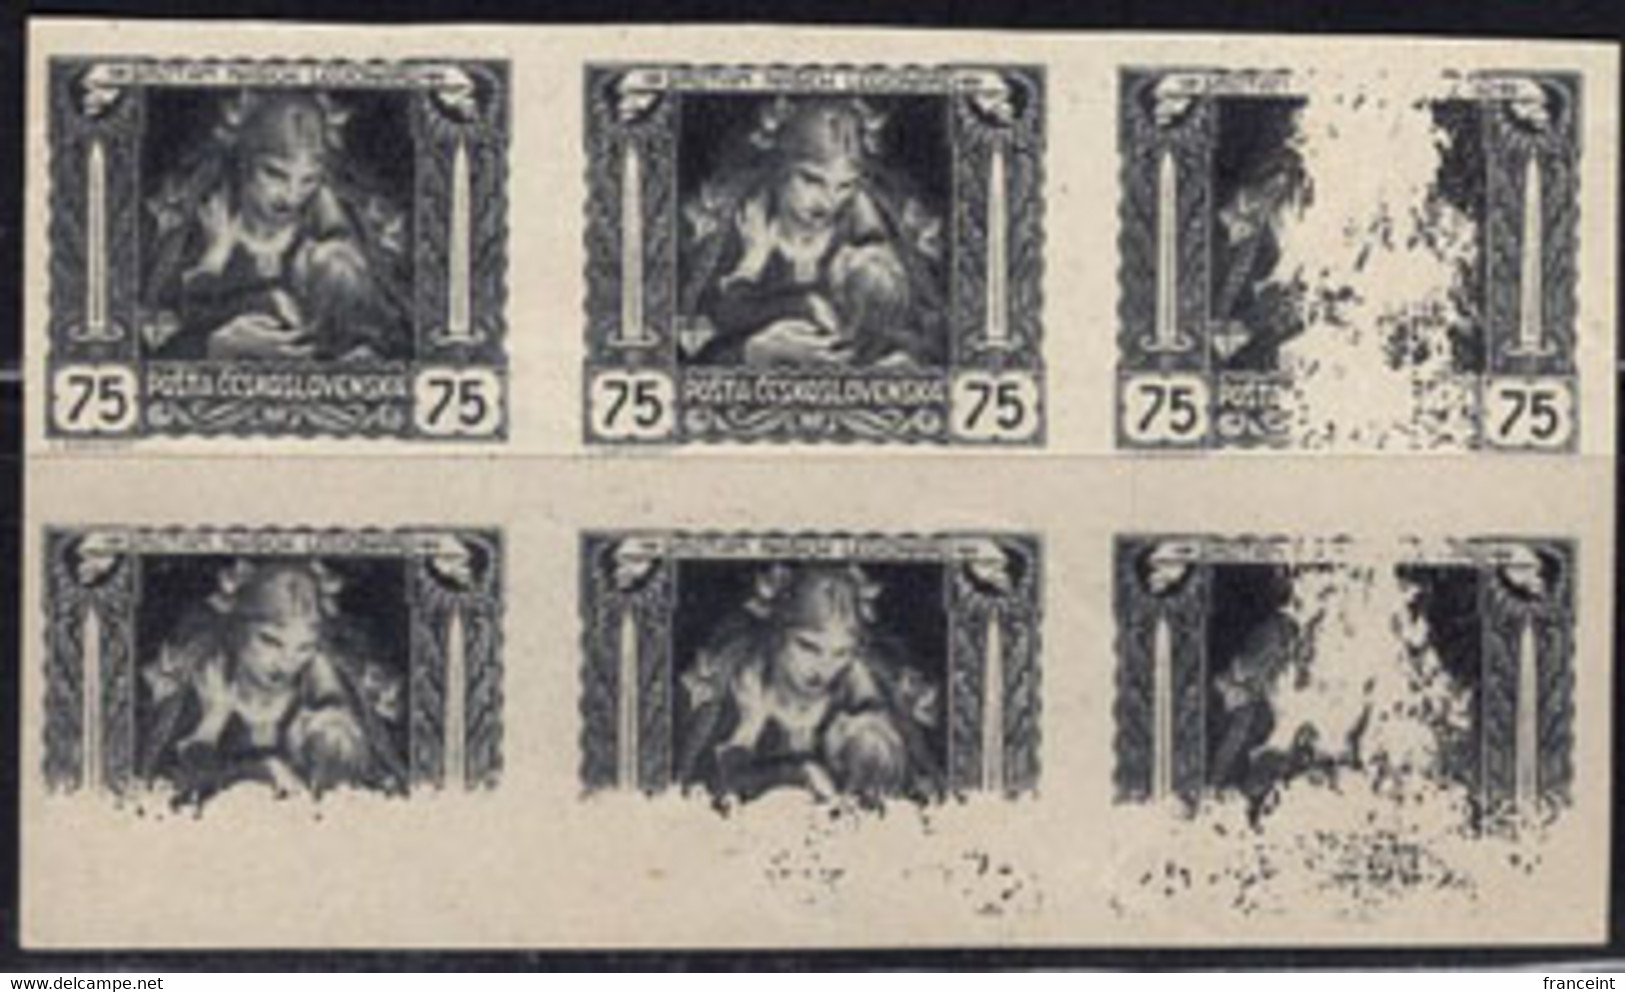 CZECHOSLOVAKIA(1919) Mother And Child. Block Of 6 Imperforate Proofs Printed On White Paper. Scott No B127. - Proeven & Herdrukken